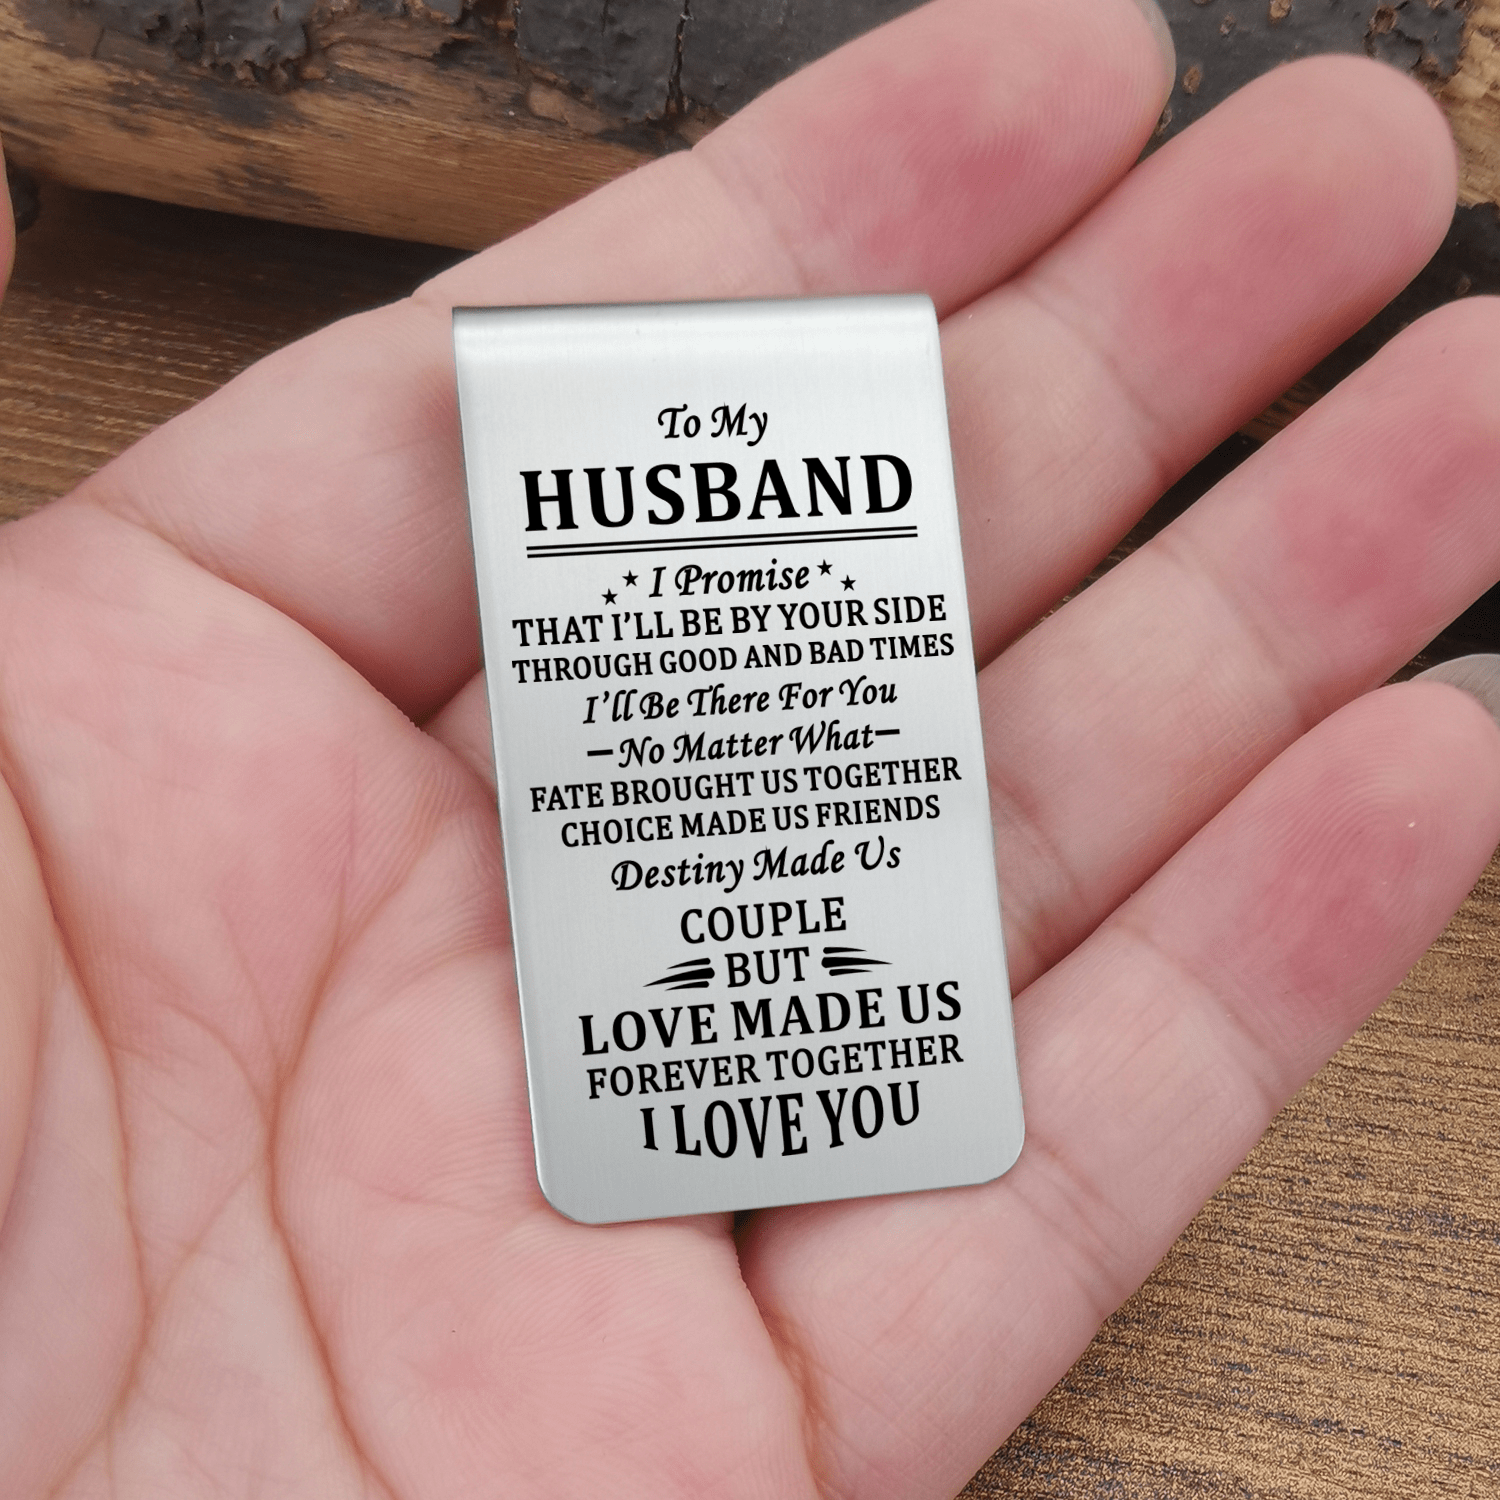 Money Clips To My Husband - Love Made Us Forever Together Engraved Money Clip GiveMe-Gifts